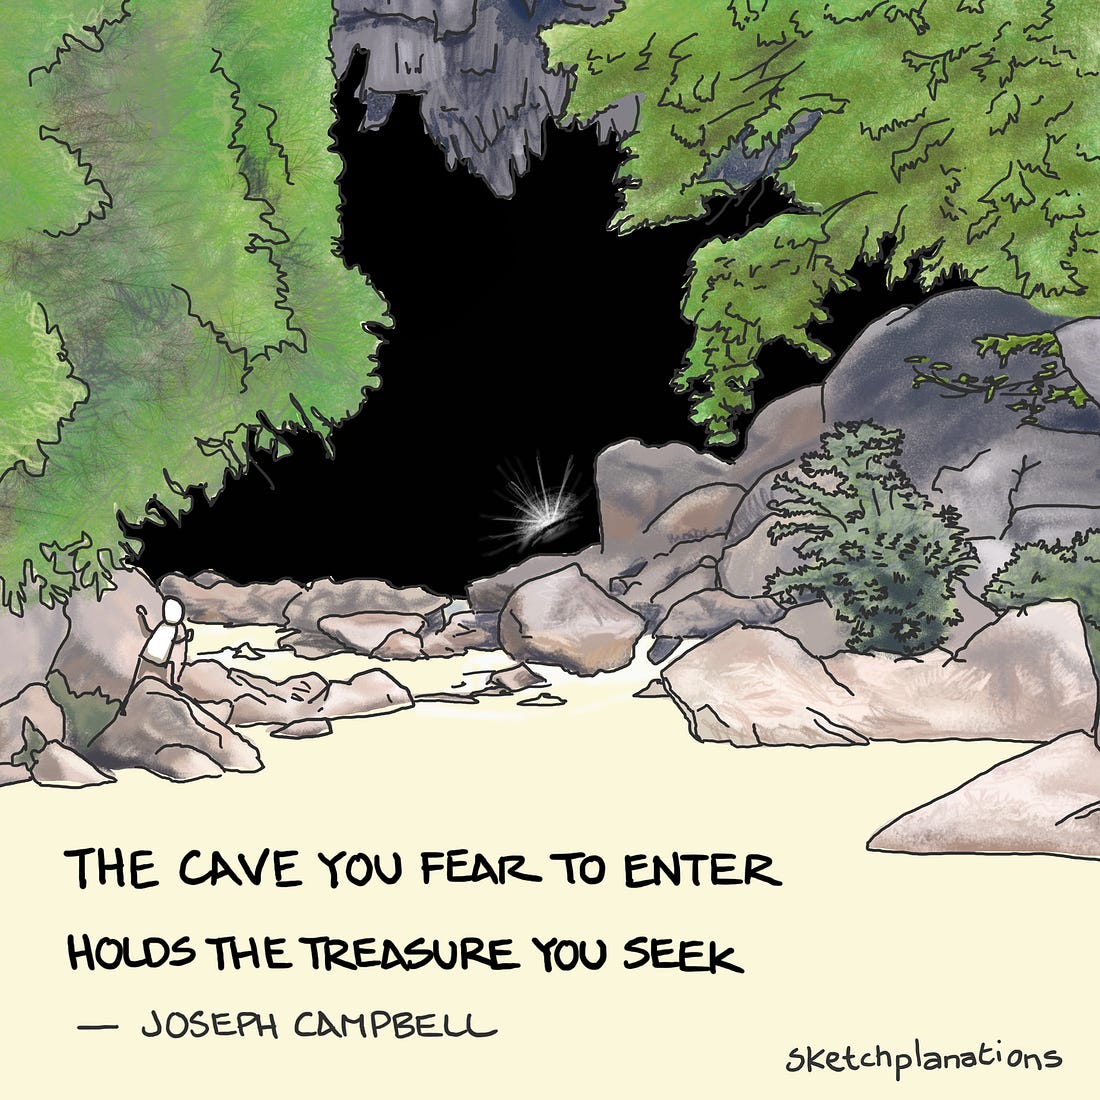 The cave you fear to enter - Sketchplanations